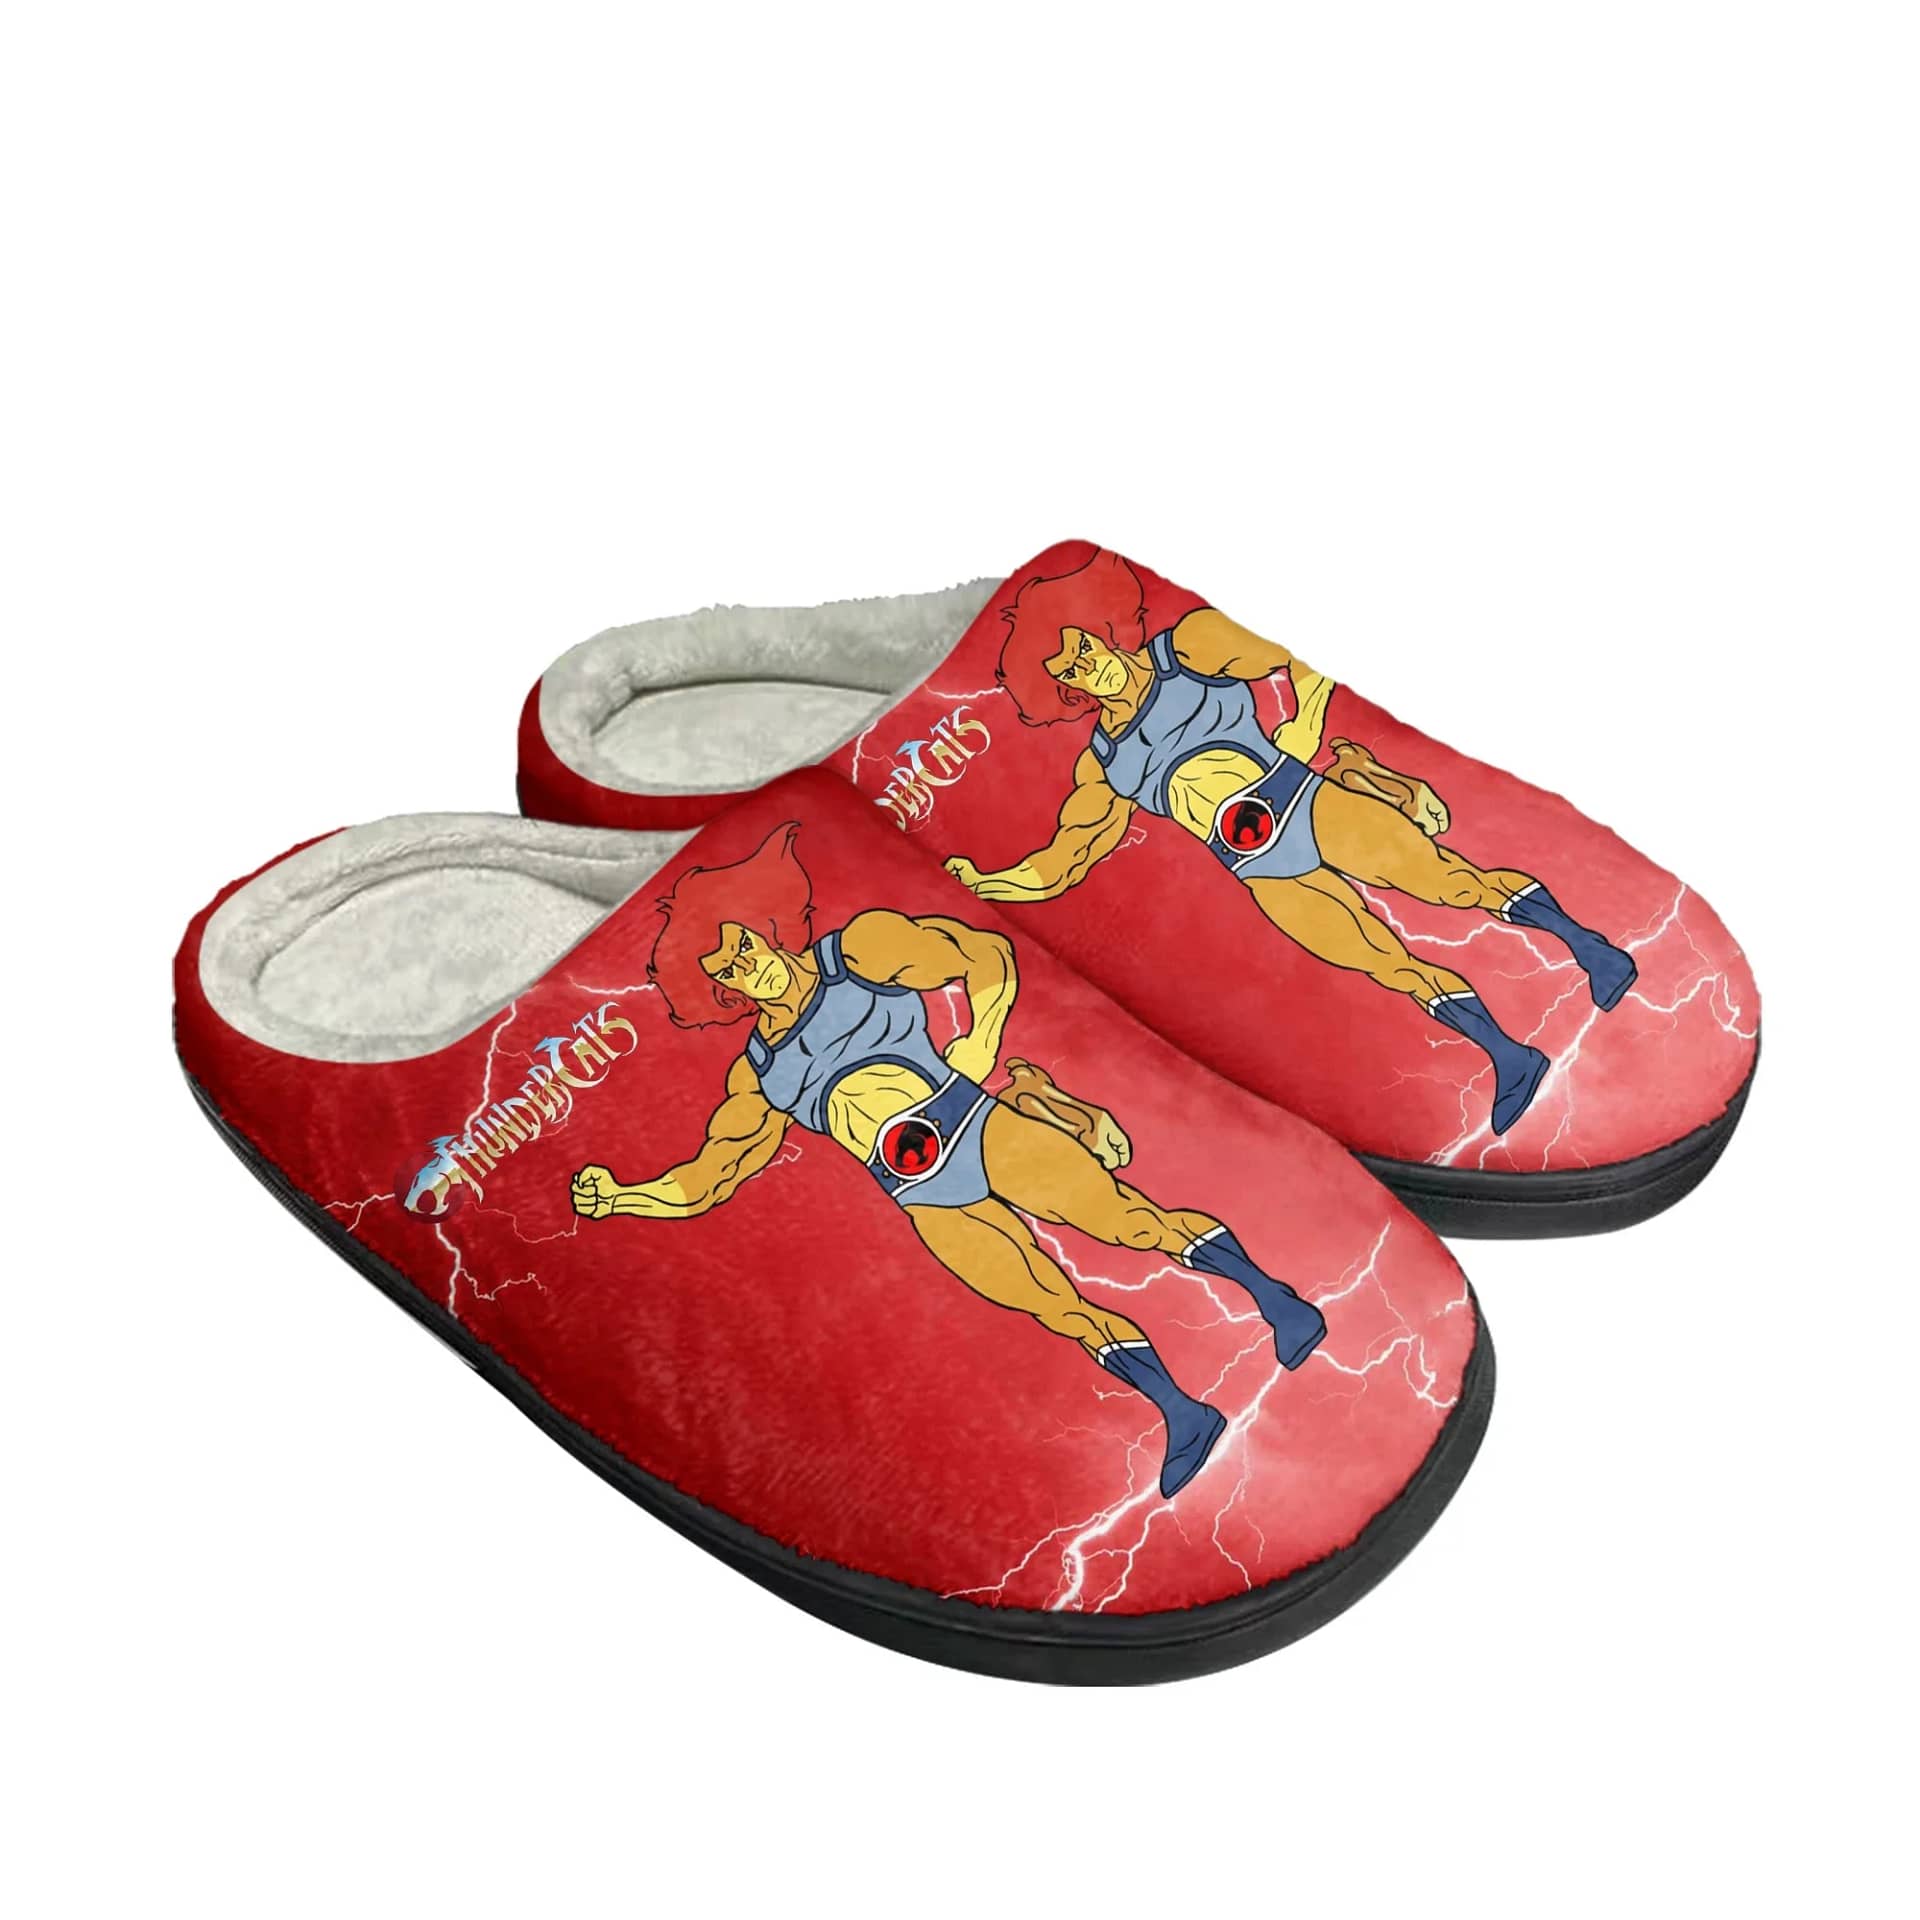 Thundercats Shoes Slippers